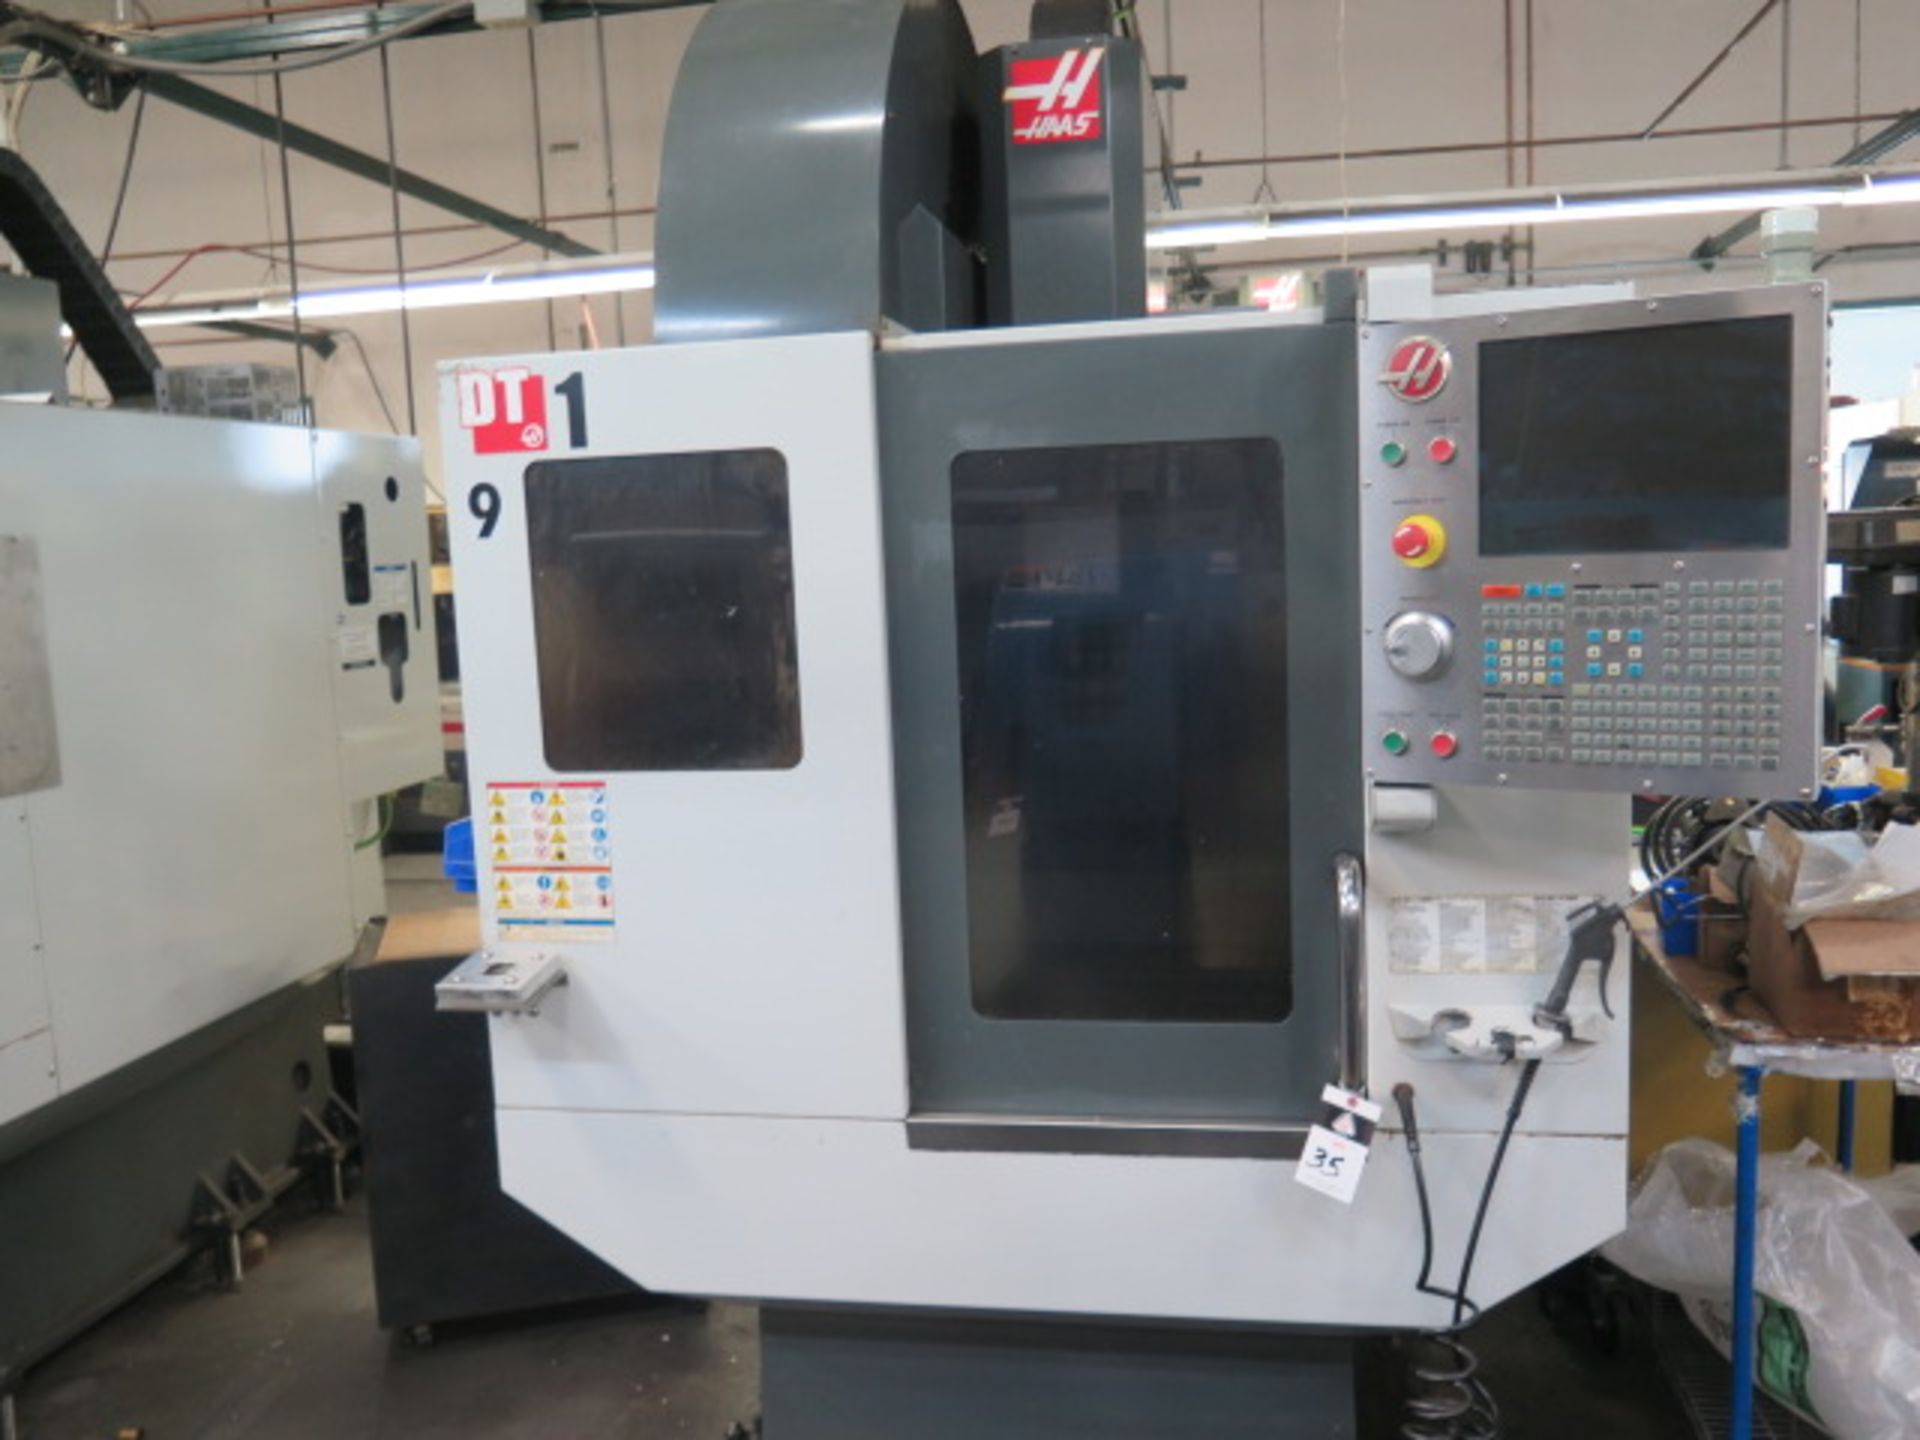 2012 Haas DT-1 4-Axis CNC VMC s/n 1093529 w/ Haas Controls, 20-Station ATC, SOLD AS IS